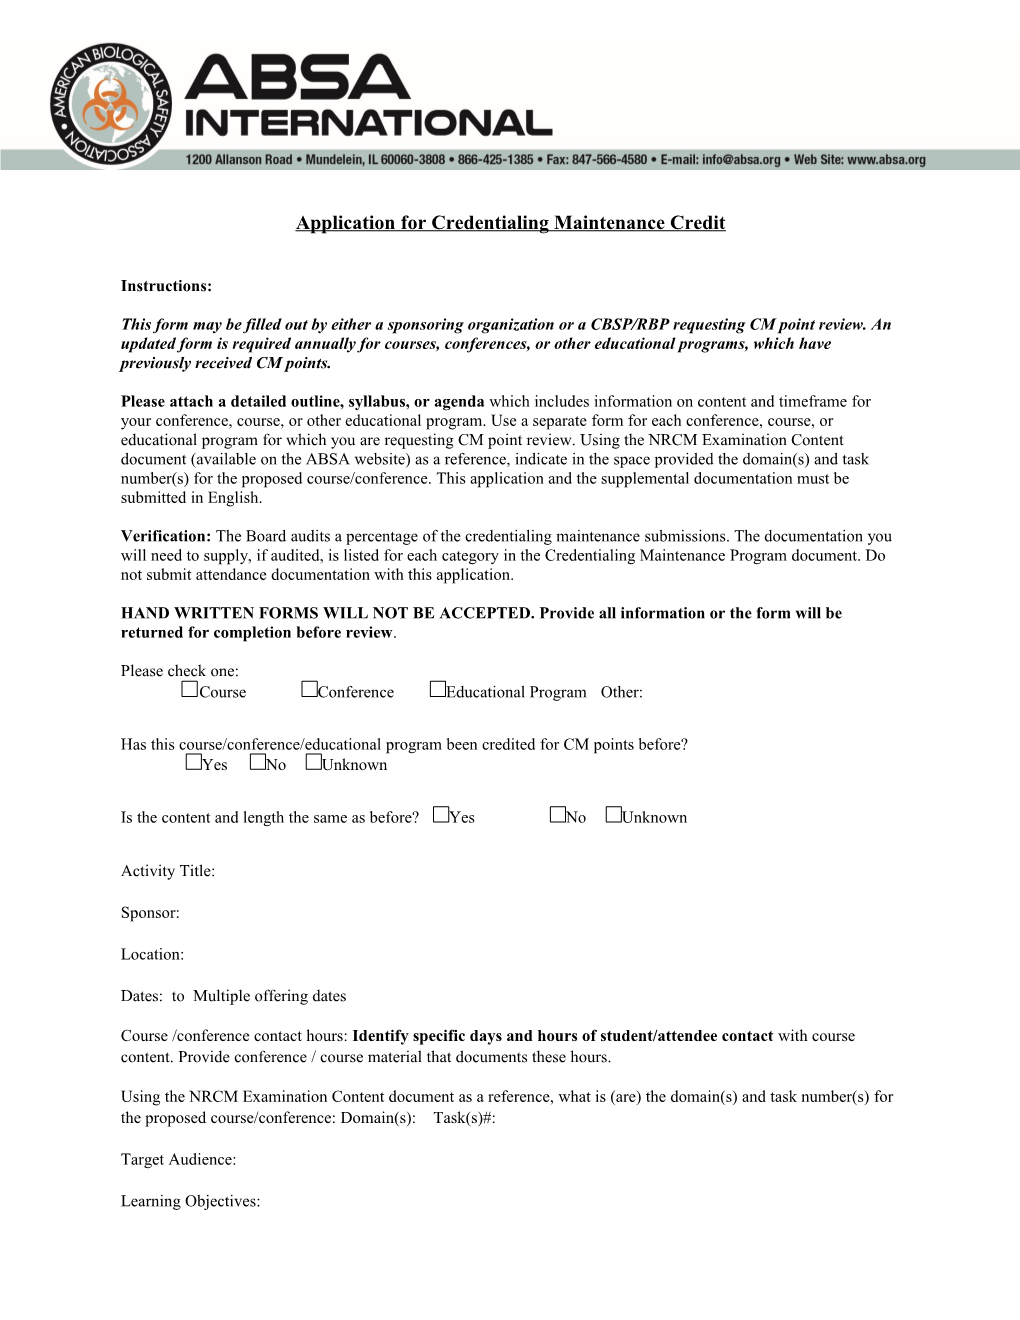 Application for Credentialing Maintenance Credit